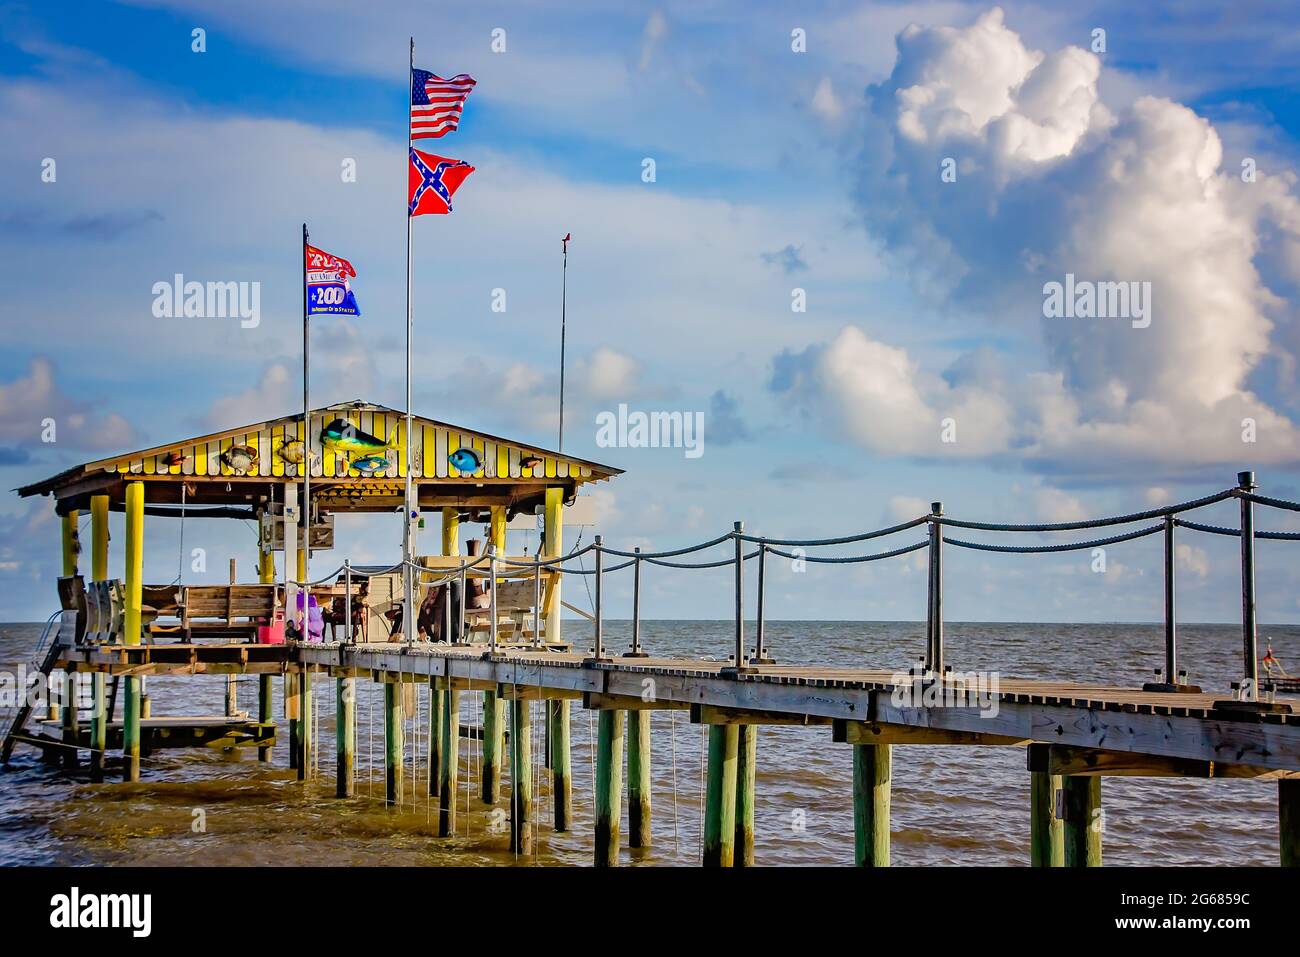 A Trump 2020 flag flies alongside an American flag and a Confederate flag at a pier on Coden Beach, July 1, 2021, in Coden, Alabama. Stock Photo